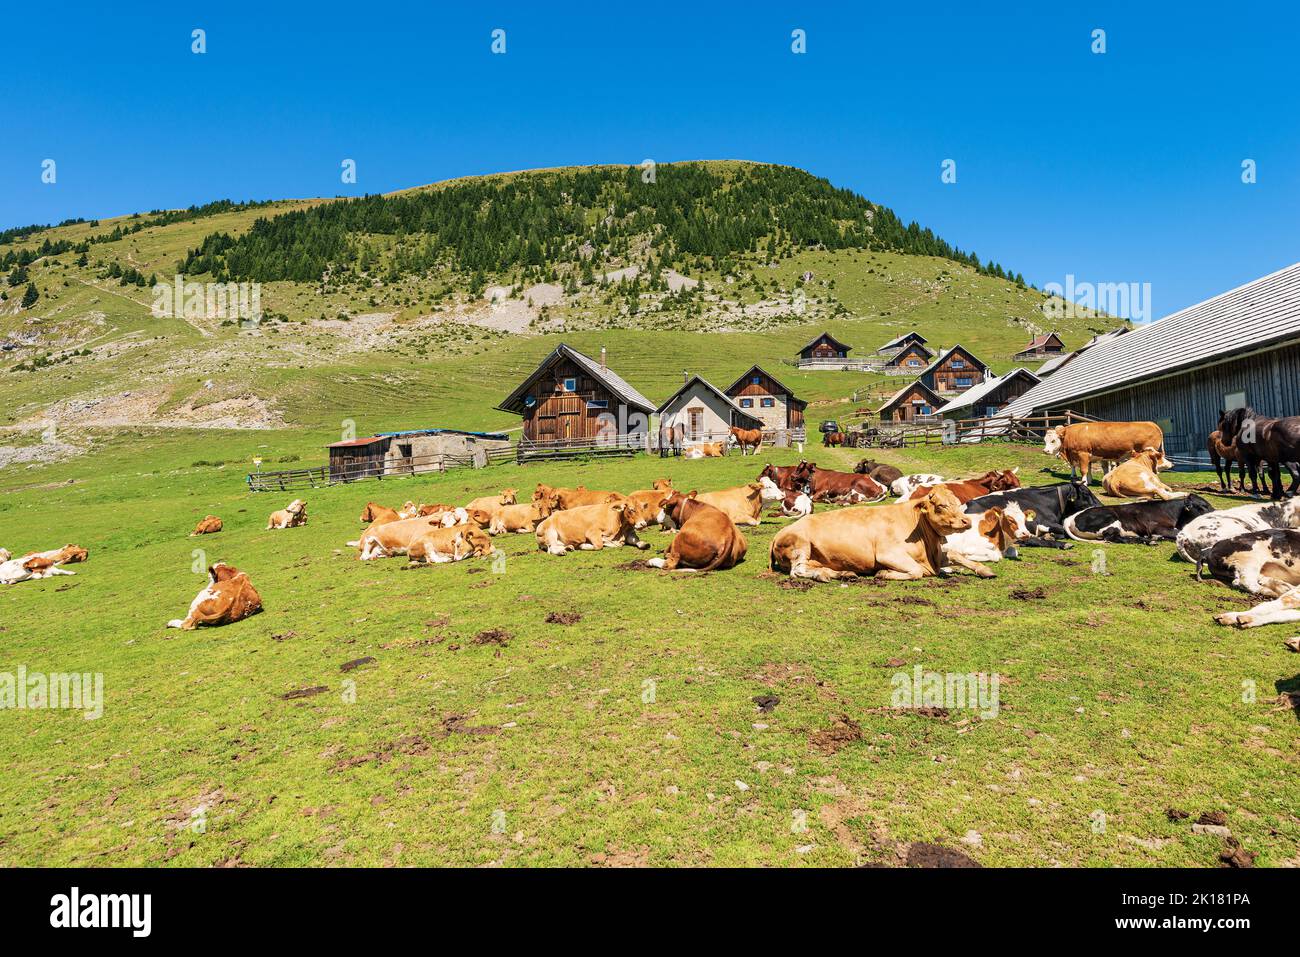 Herd of dairy cows and horses in a mountain pasture, Italy-Austria border, Feistritz an der Gail municipality, Osternig or Oisternig peak, Austria. Stock Photo